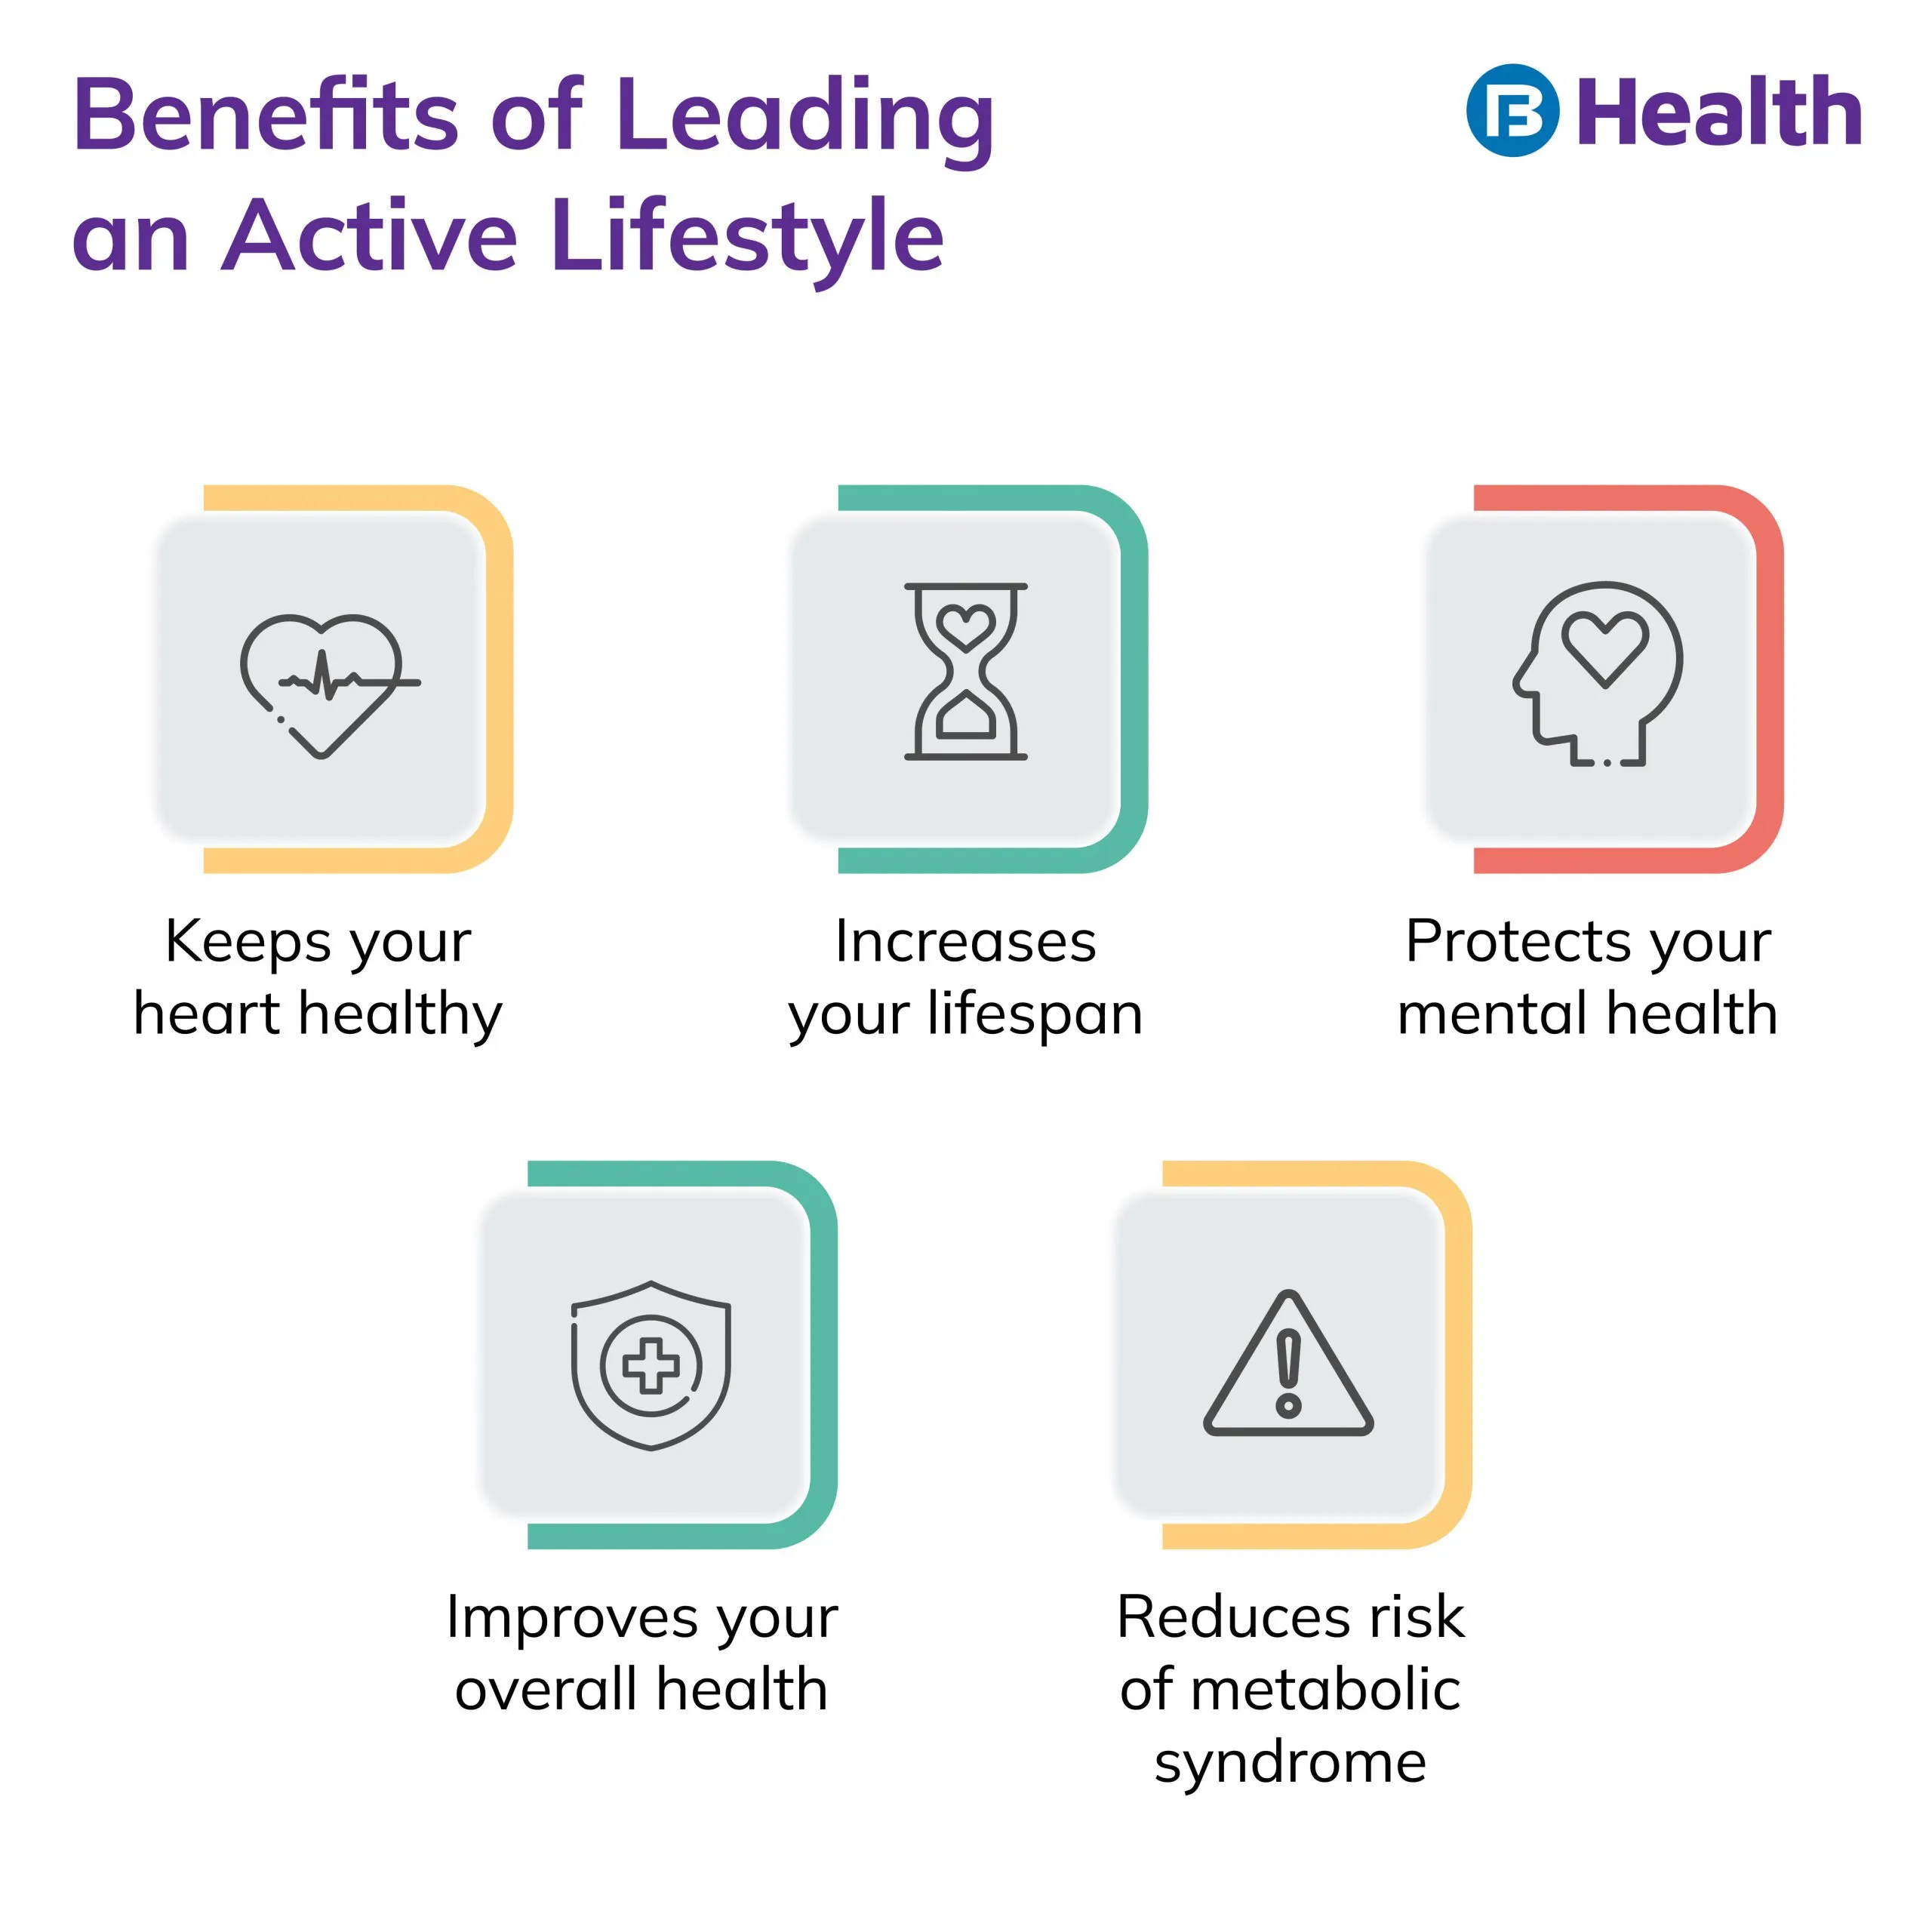 benefits of leading active lifestyle Infographic